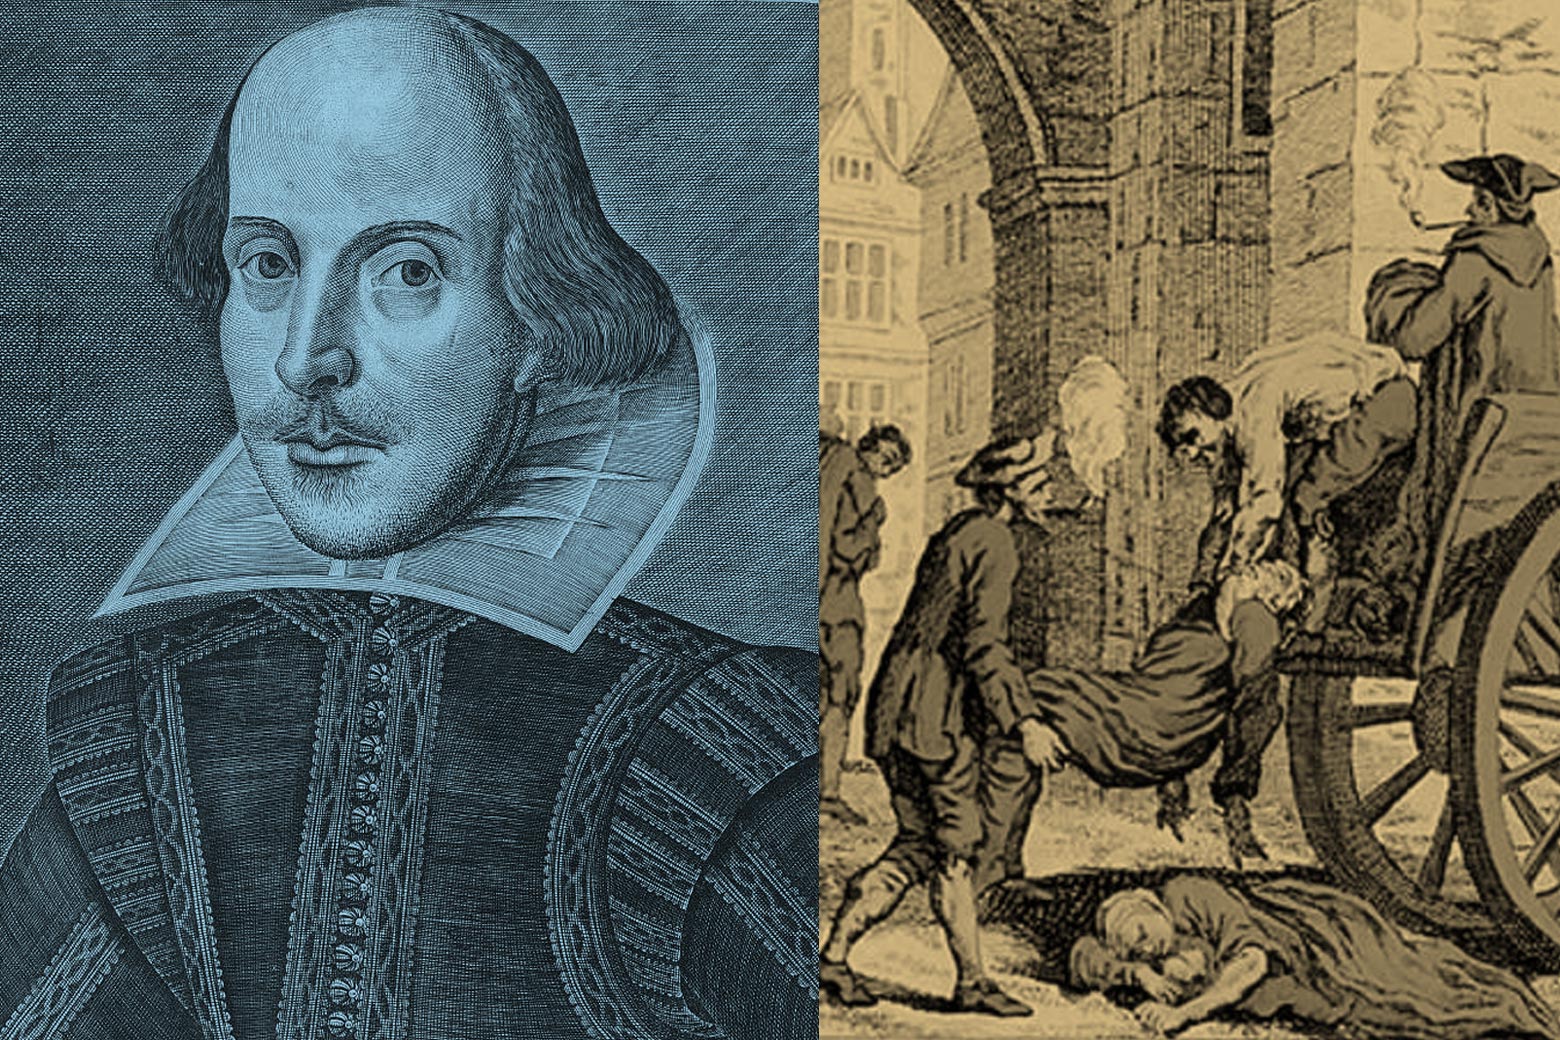 Diptych of a portrait of Shakespeare and an illustration of the plague.